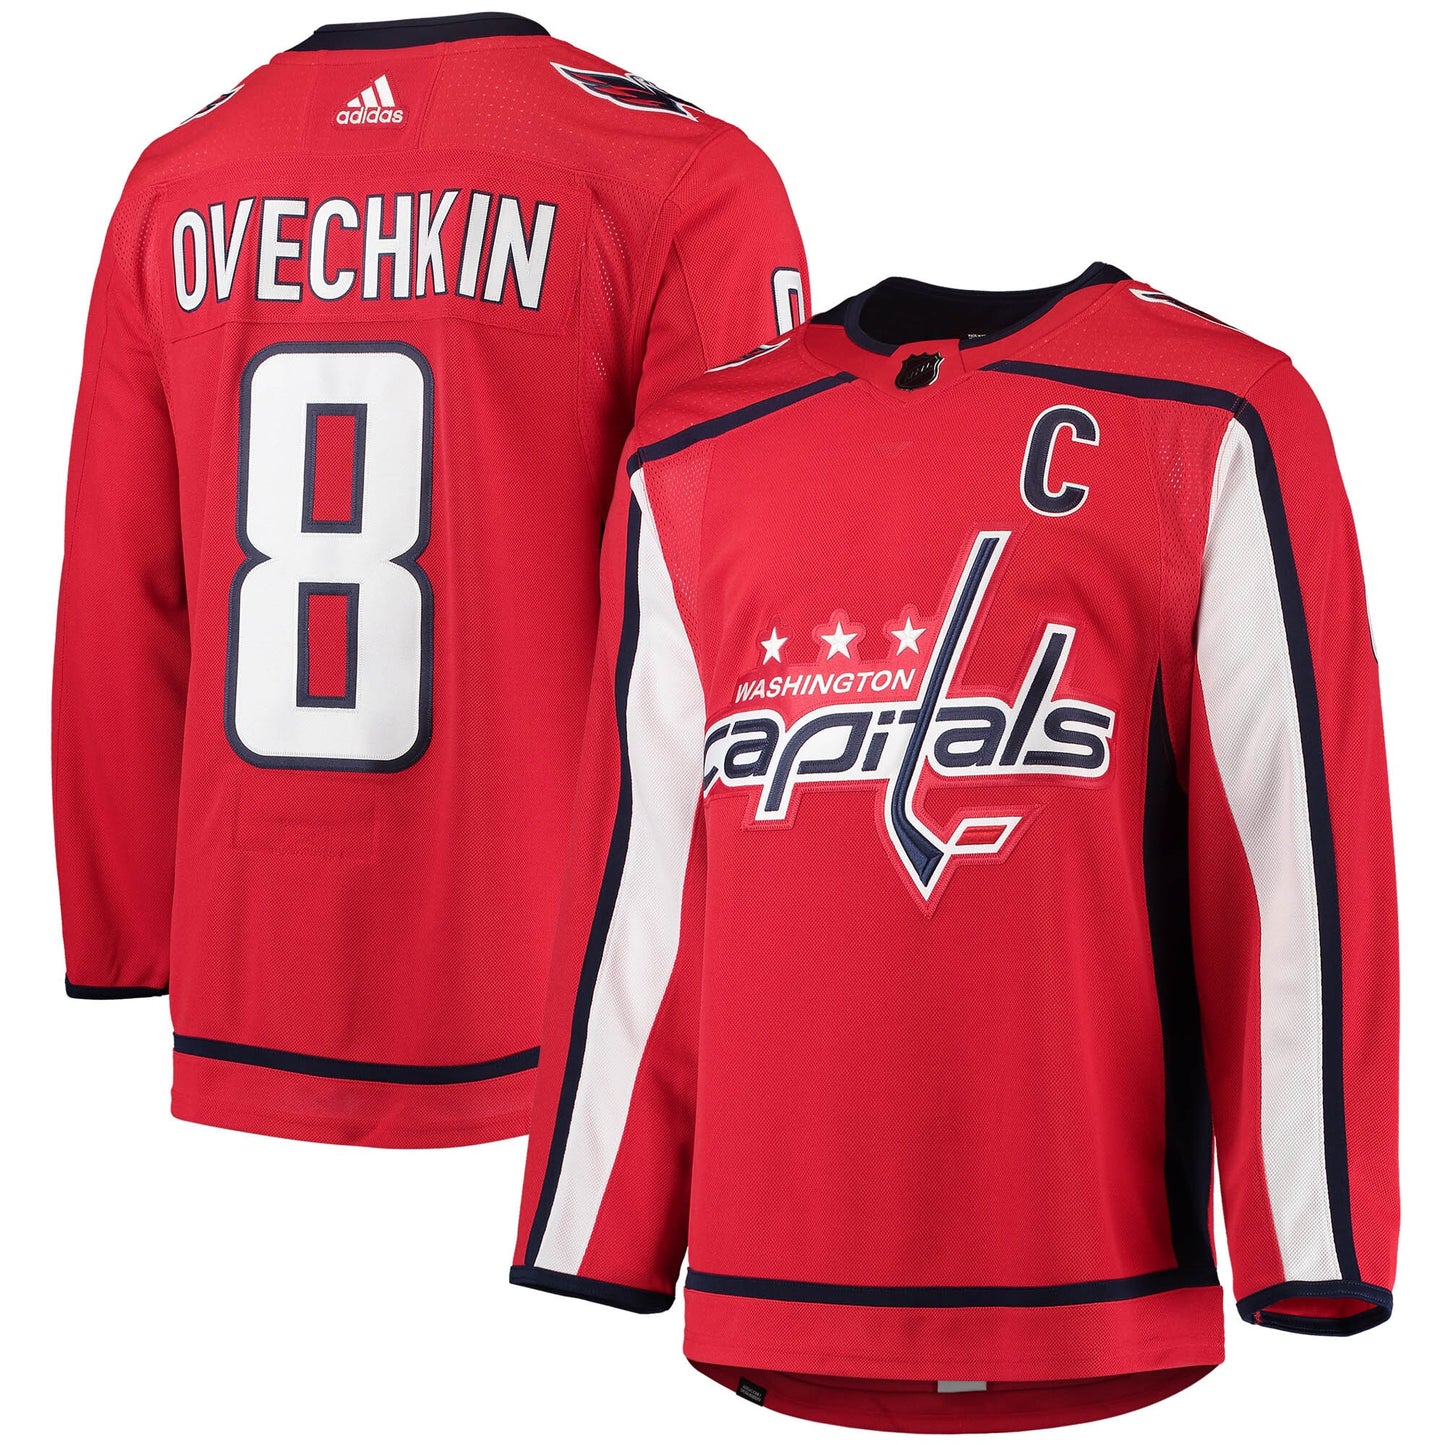 Alexander Ovechkin Washington Capitals adidas Home Primegreen Authentic Pro Player Jersey - Red